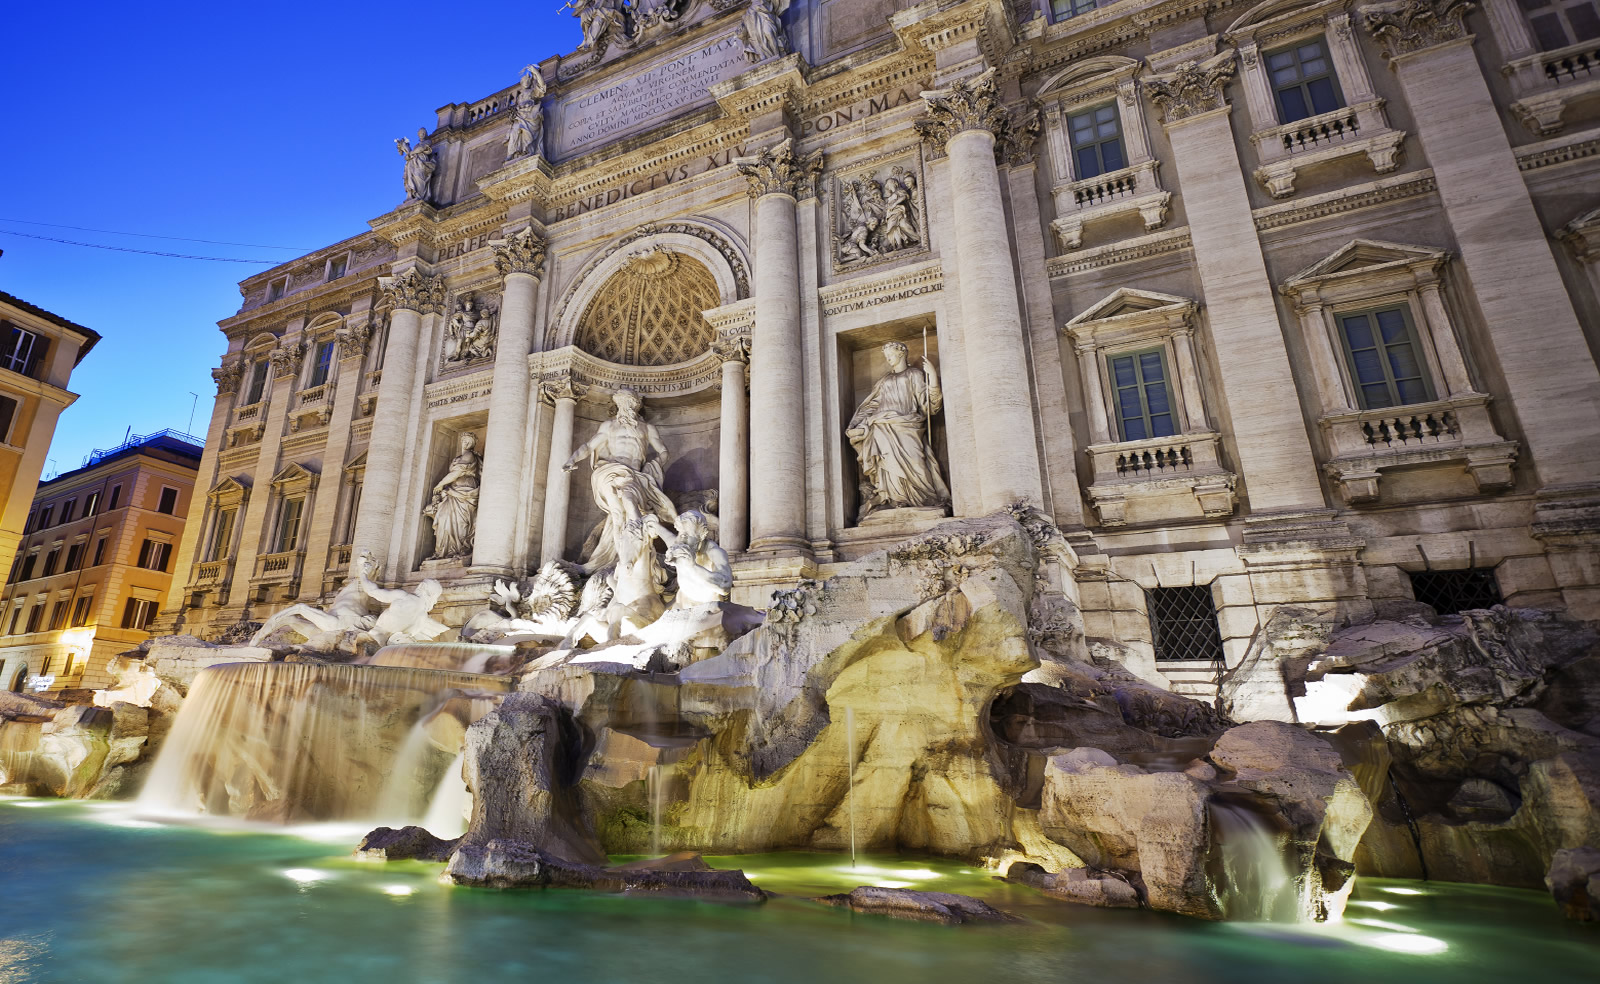 Fontana-Di-Trevi-The-Largest-Baroque-Fountain-In-The-Trevi